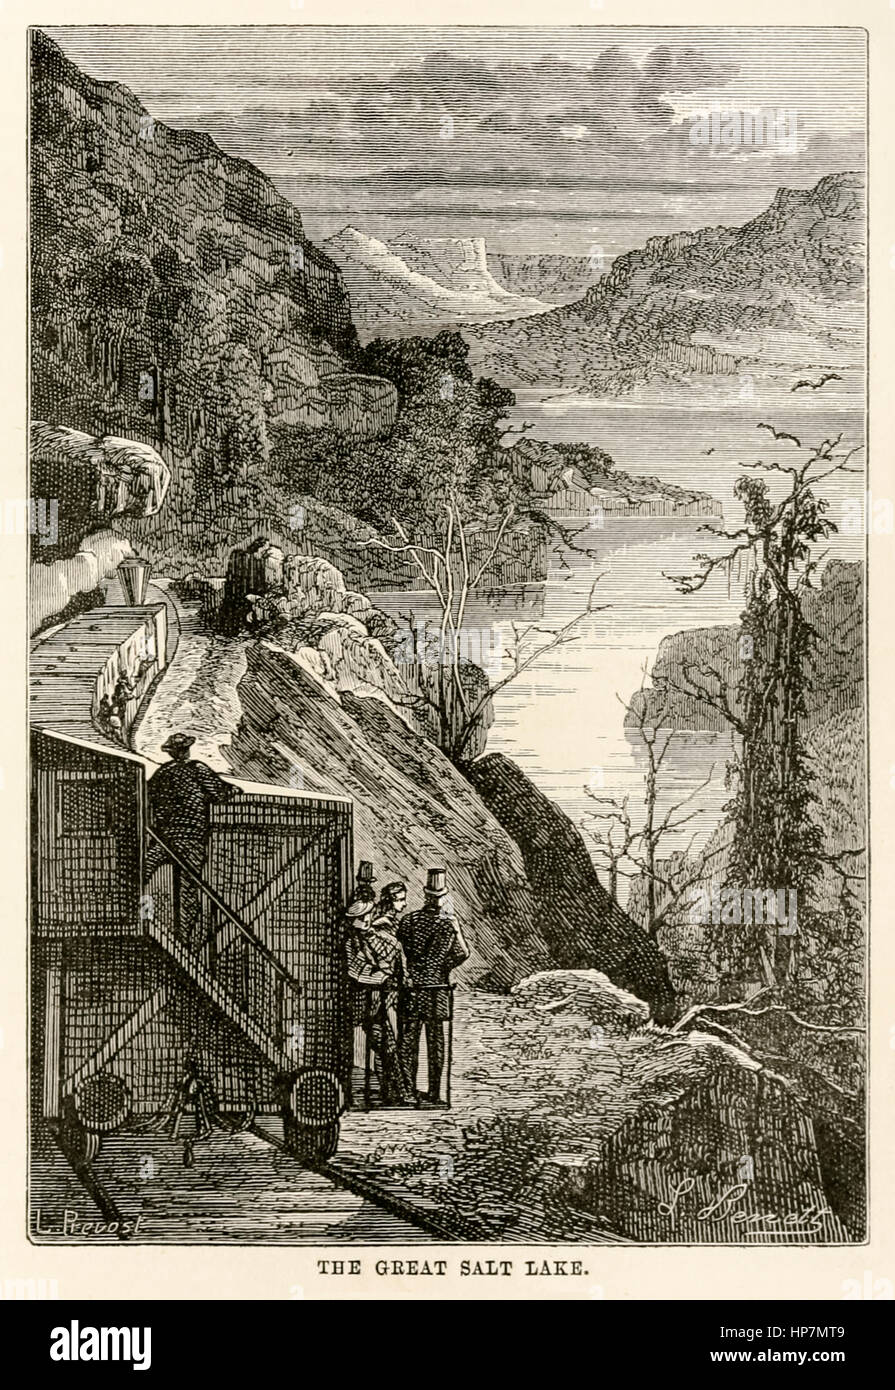 “The Great Salt Lake.” from ‘Around the World in Eighty Days’ by Jules Verne (1828-1905) published in 1873 illustration by Léon Benett (1839-1917) and engraving by Prévost. Stock Photo